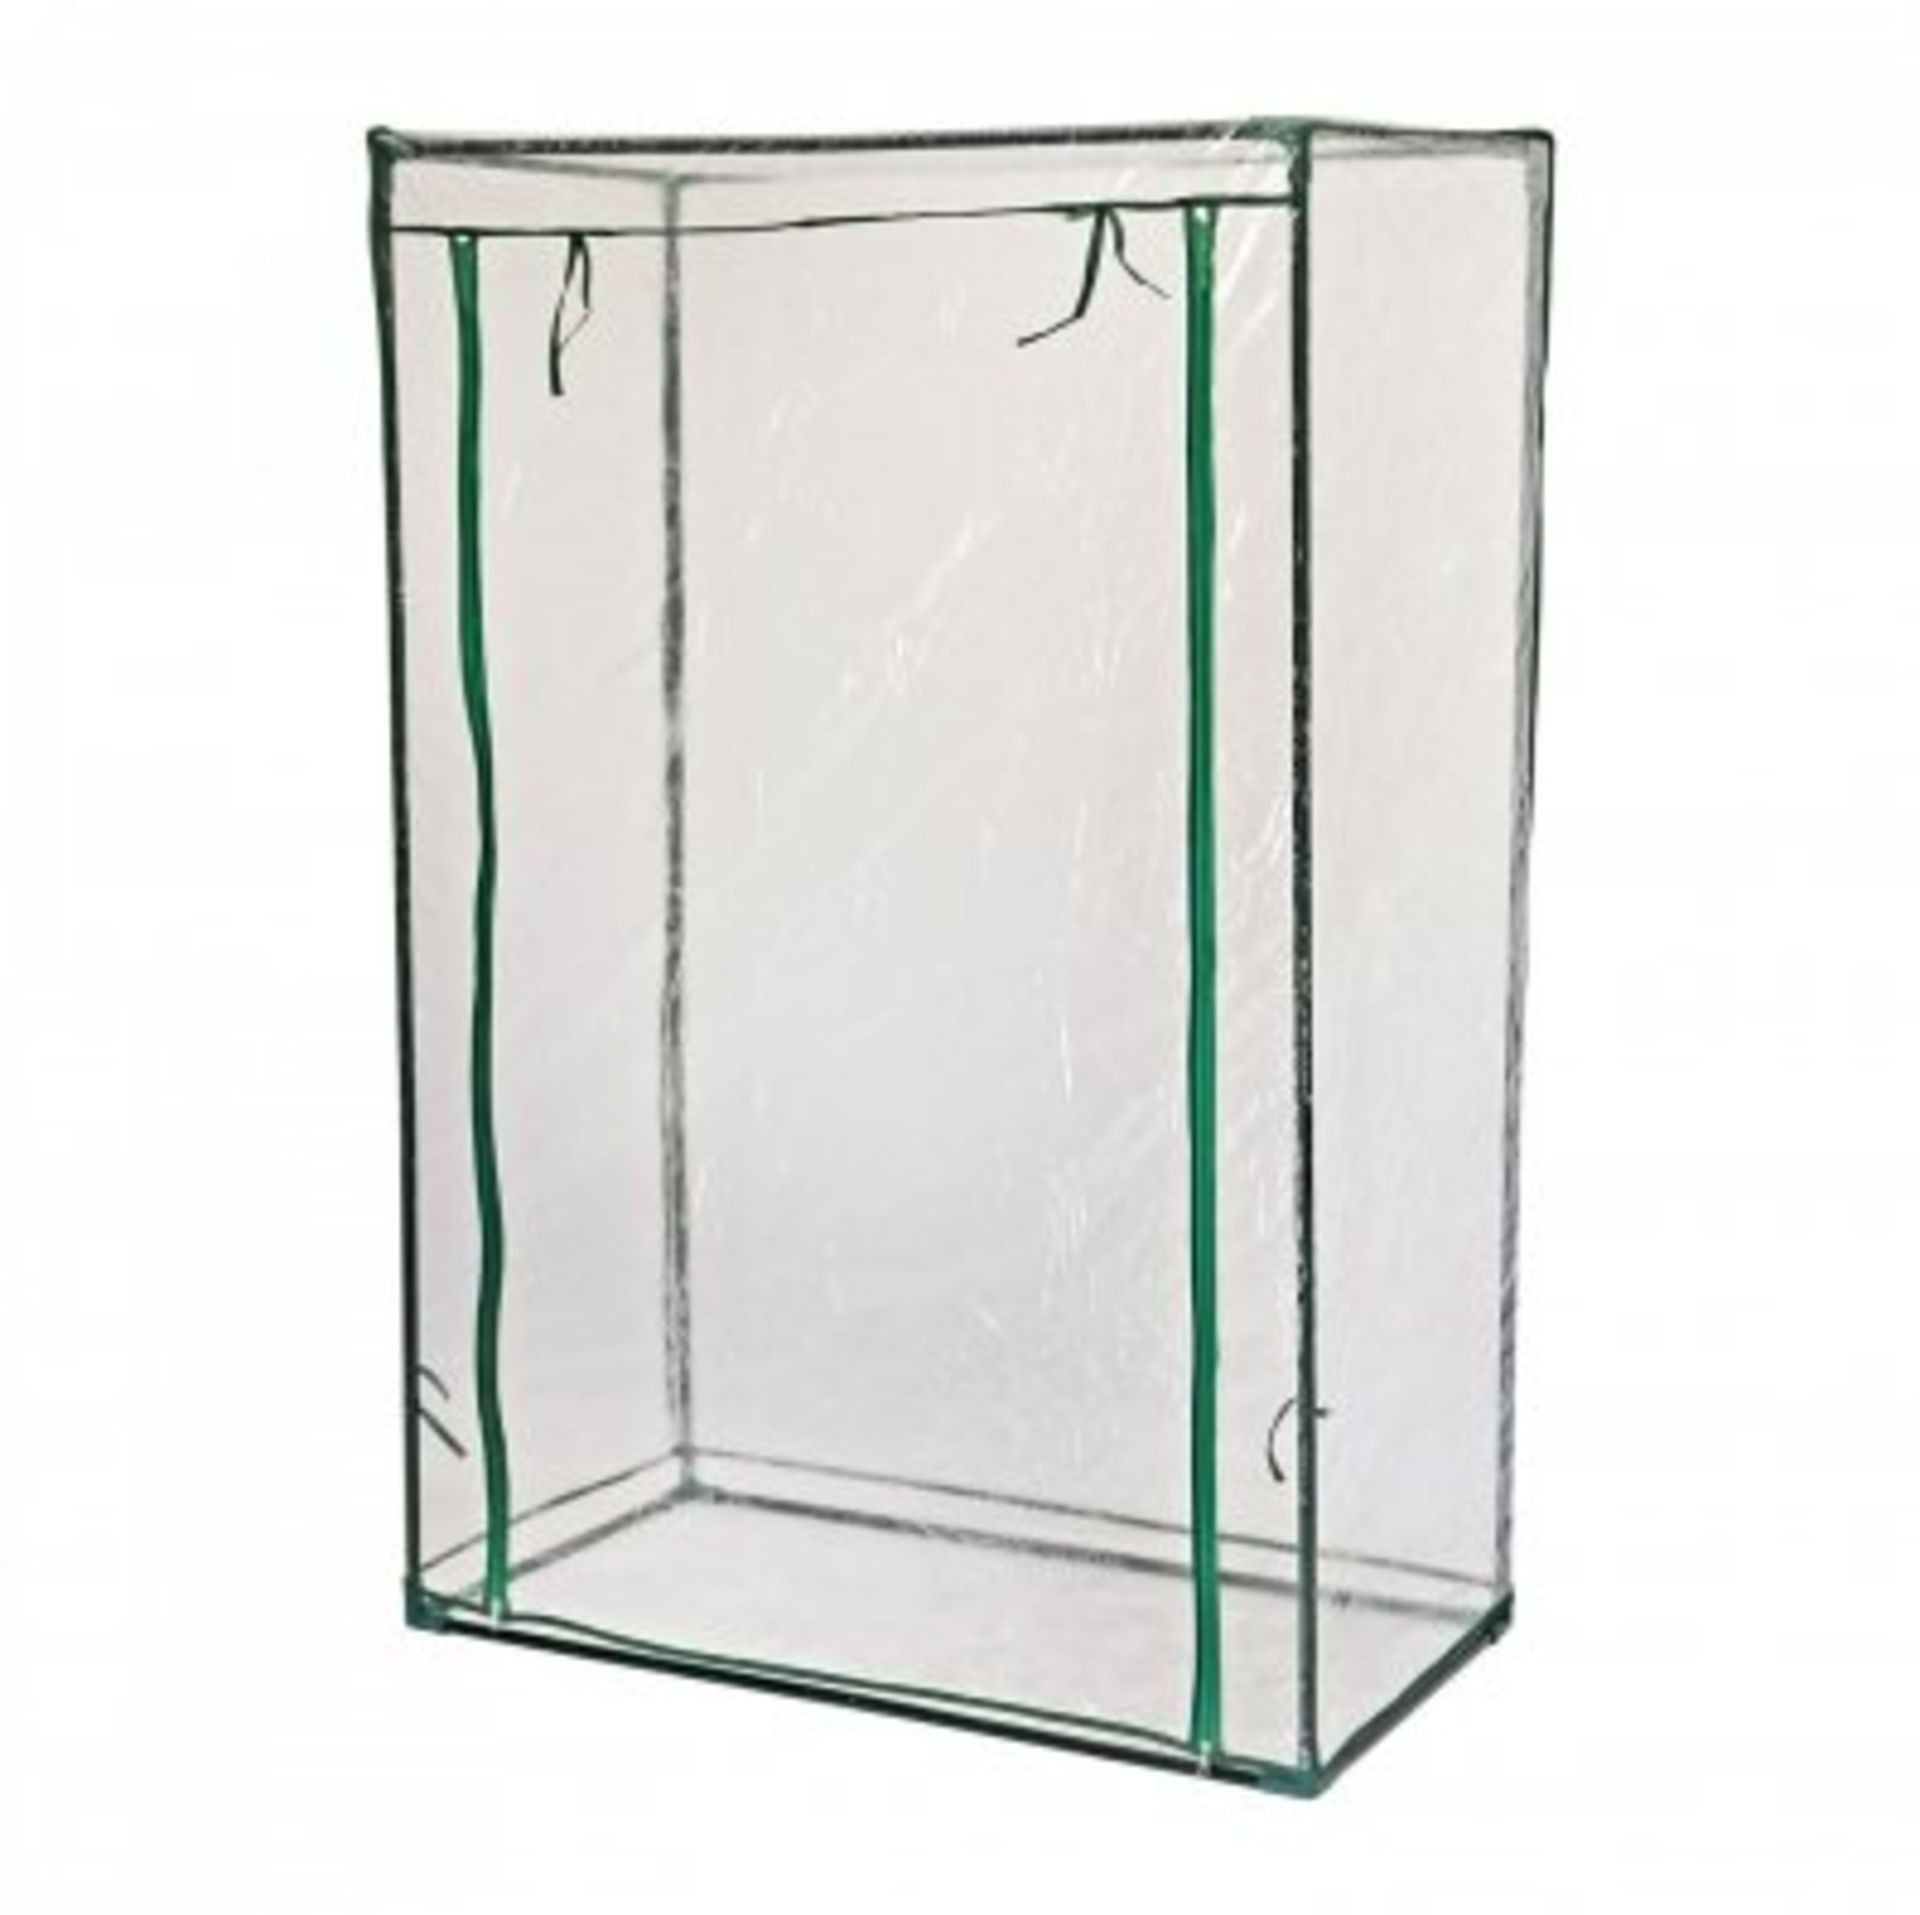 (SP516) Mini Growbag Tomato Growhouse Garden Greenhouse with PVC Cover Our mini greenhouse ...